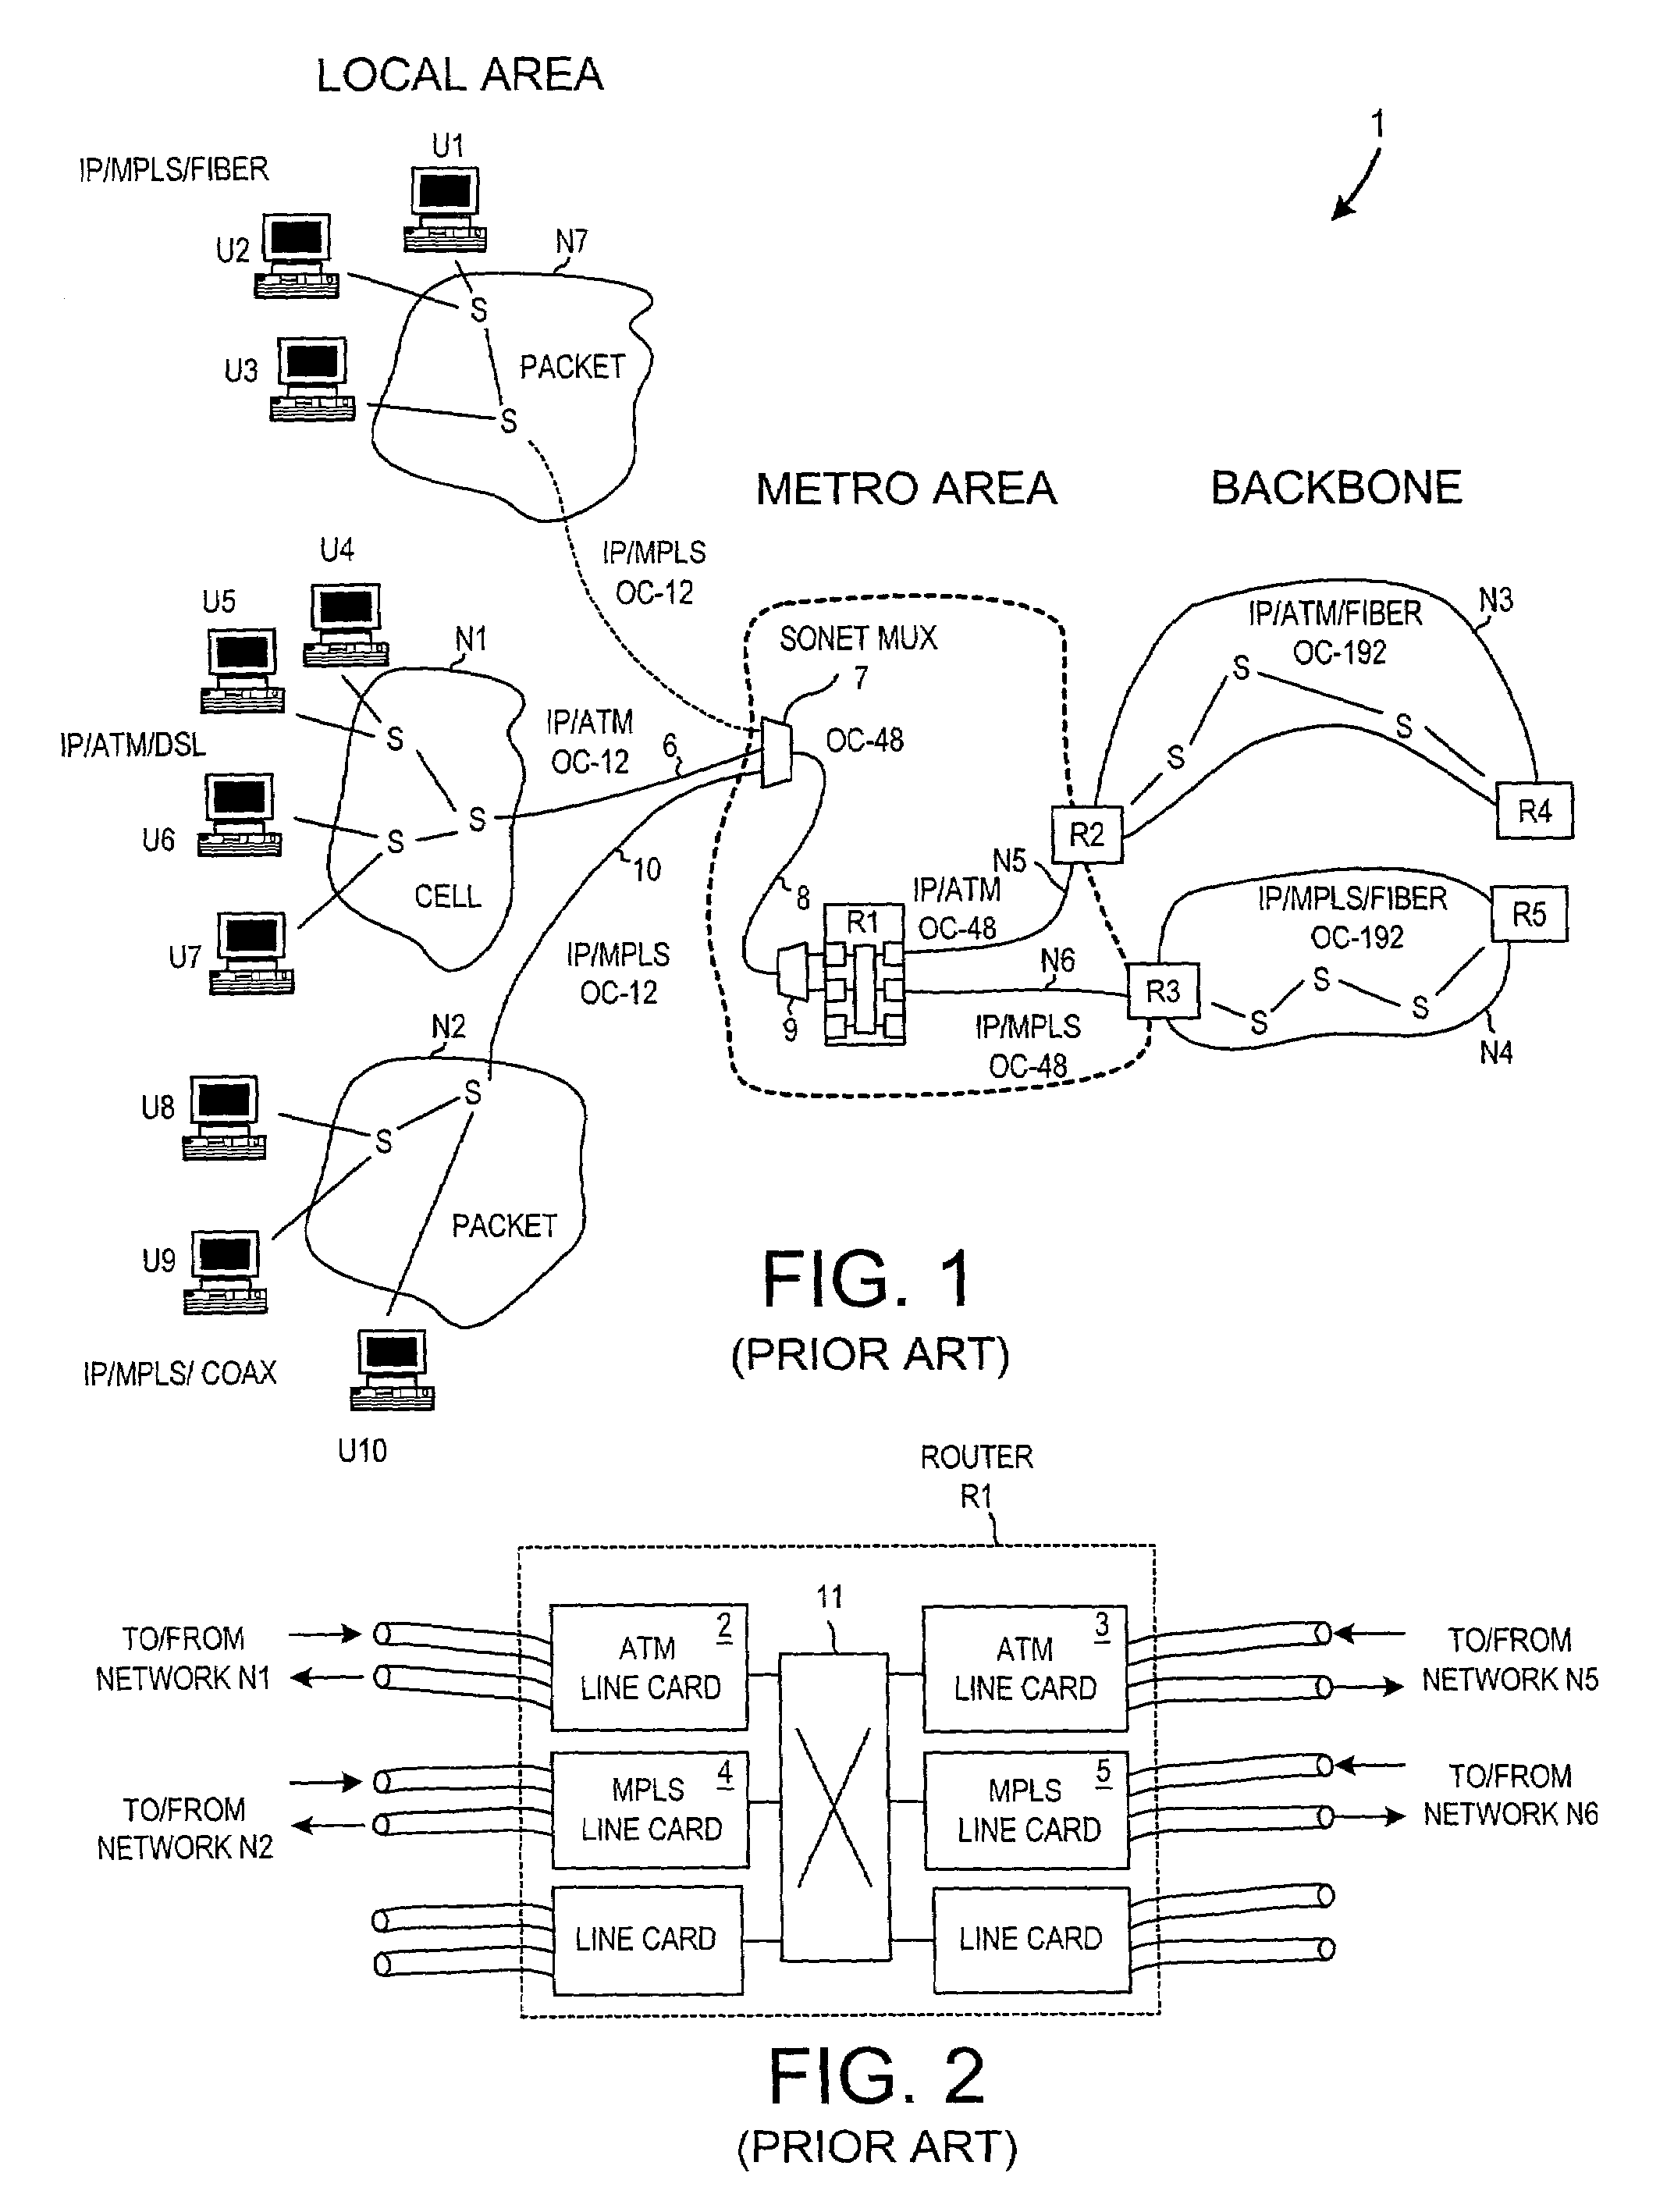 Multi-service segmentation and reassembly device with a single data path that handles both cell and packet traffic